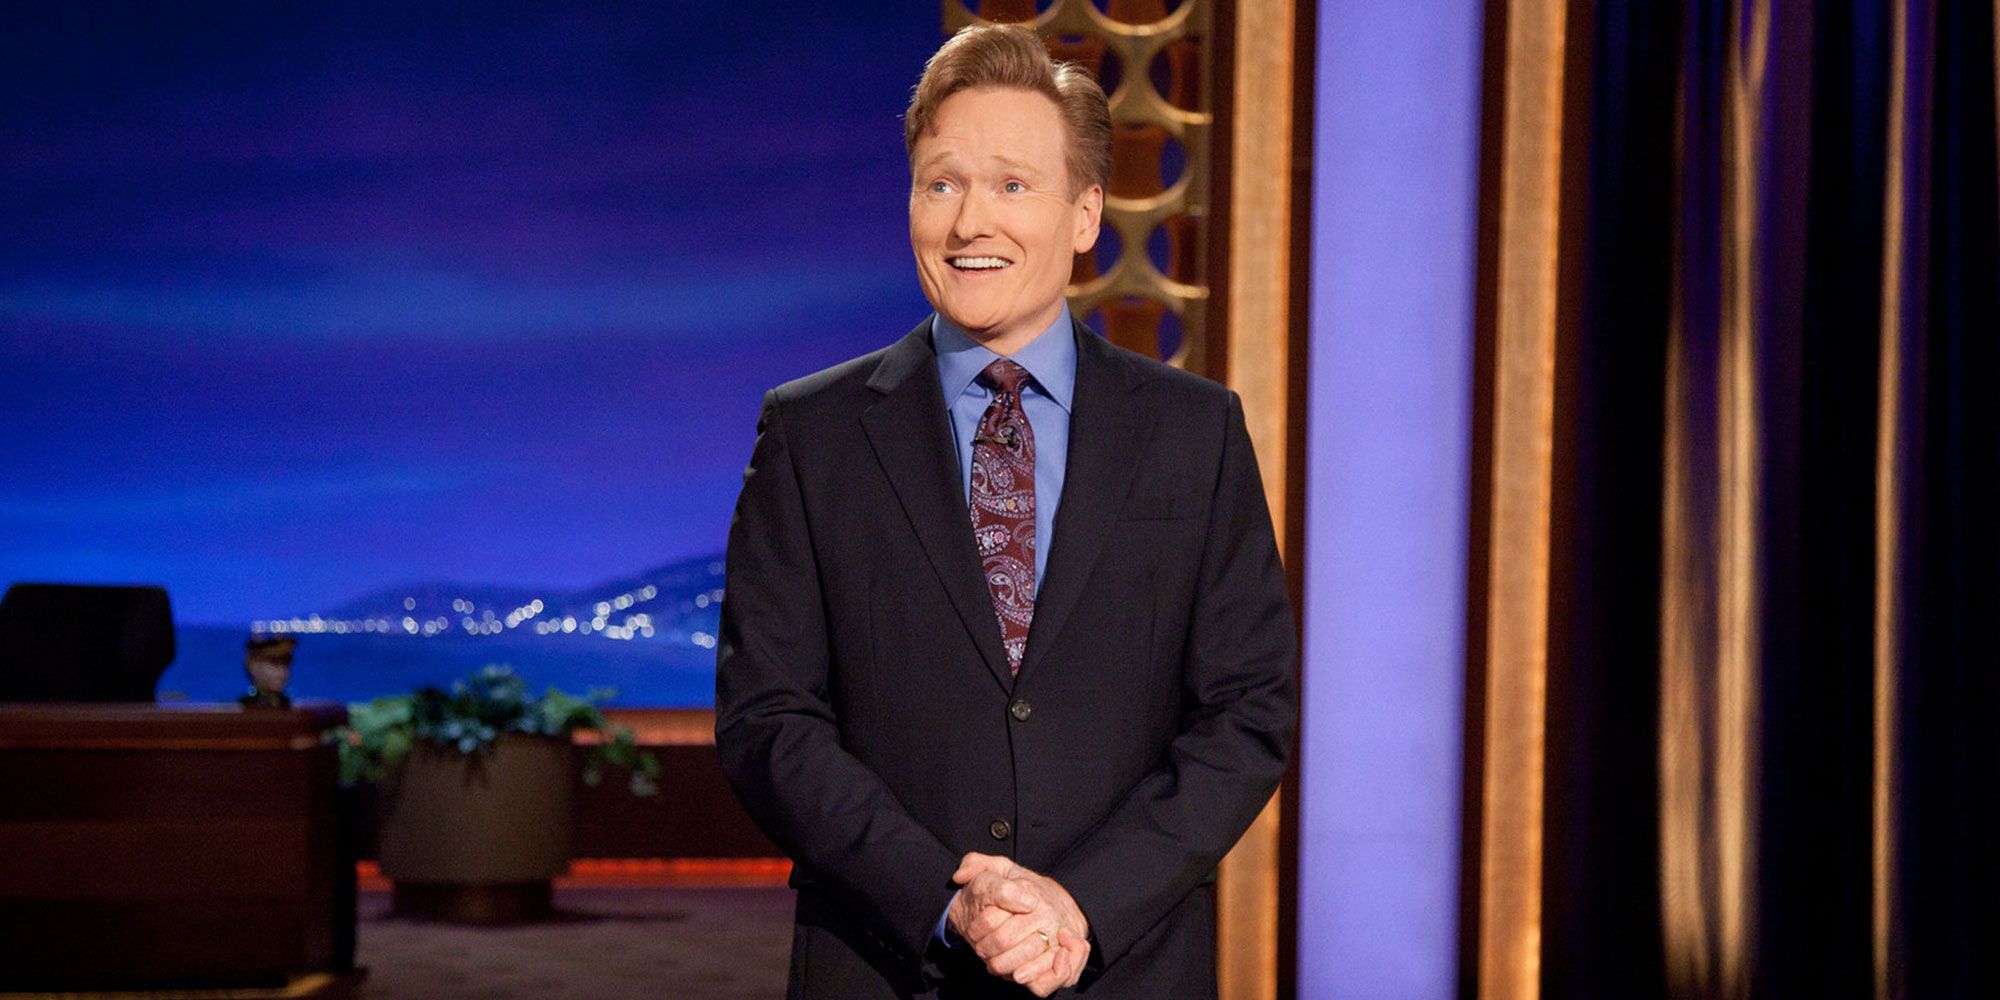 Conan O'Brien on stage smiling